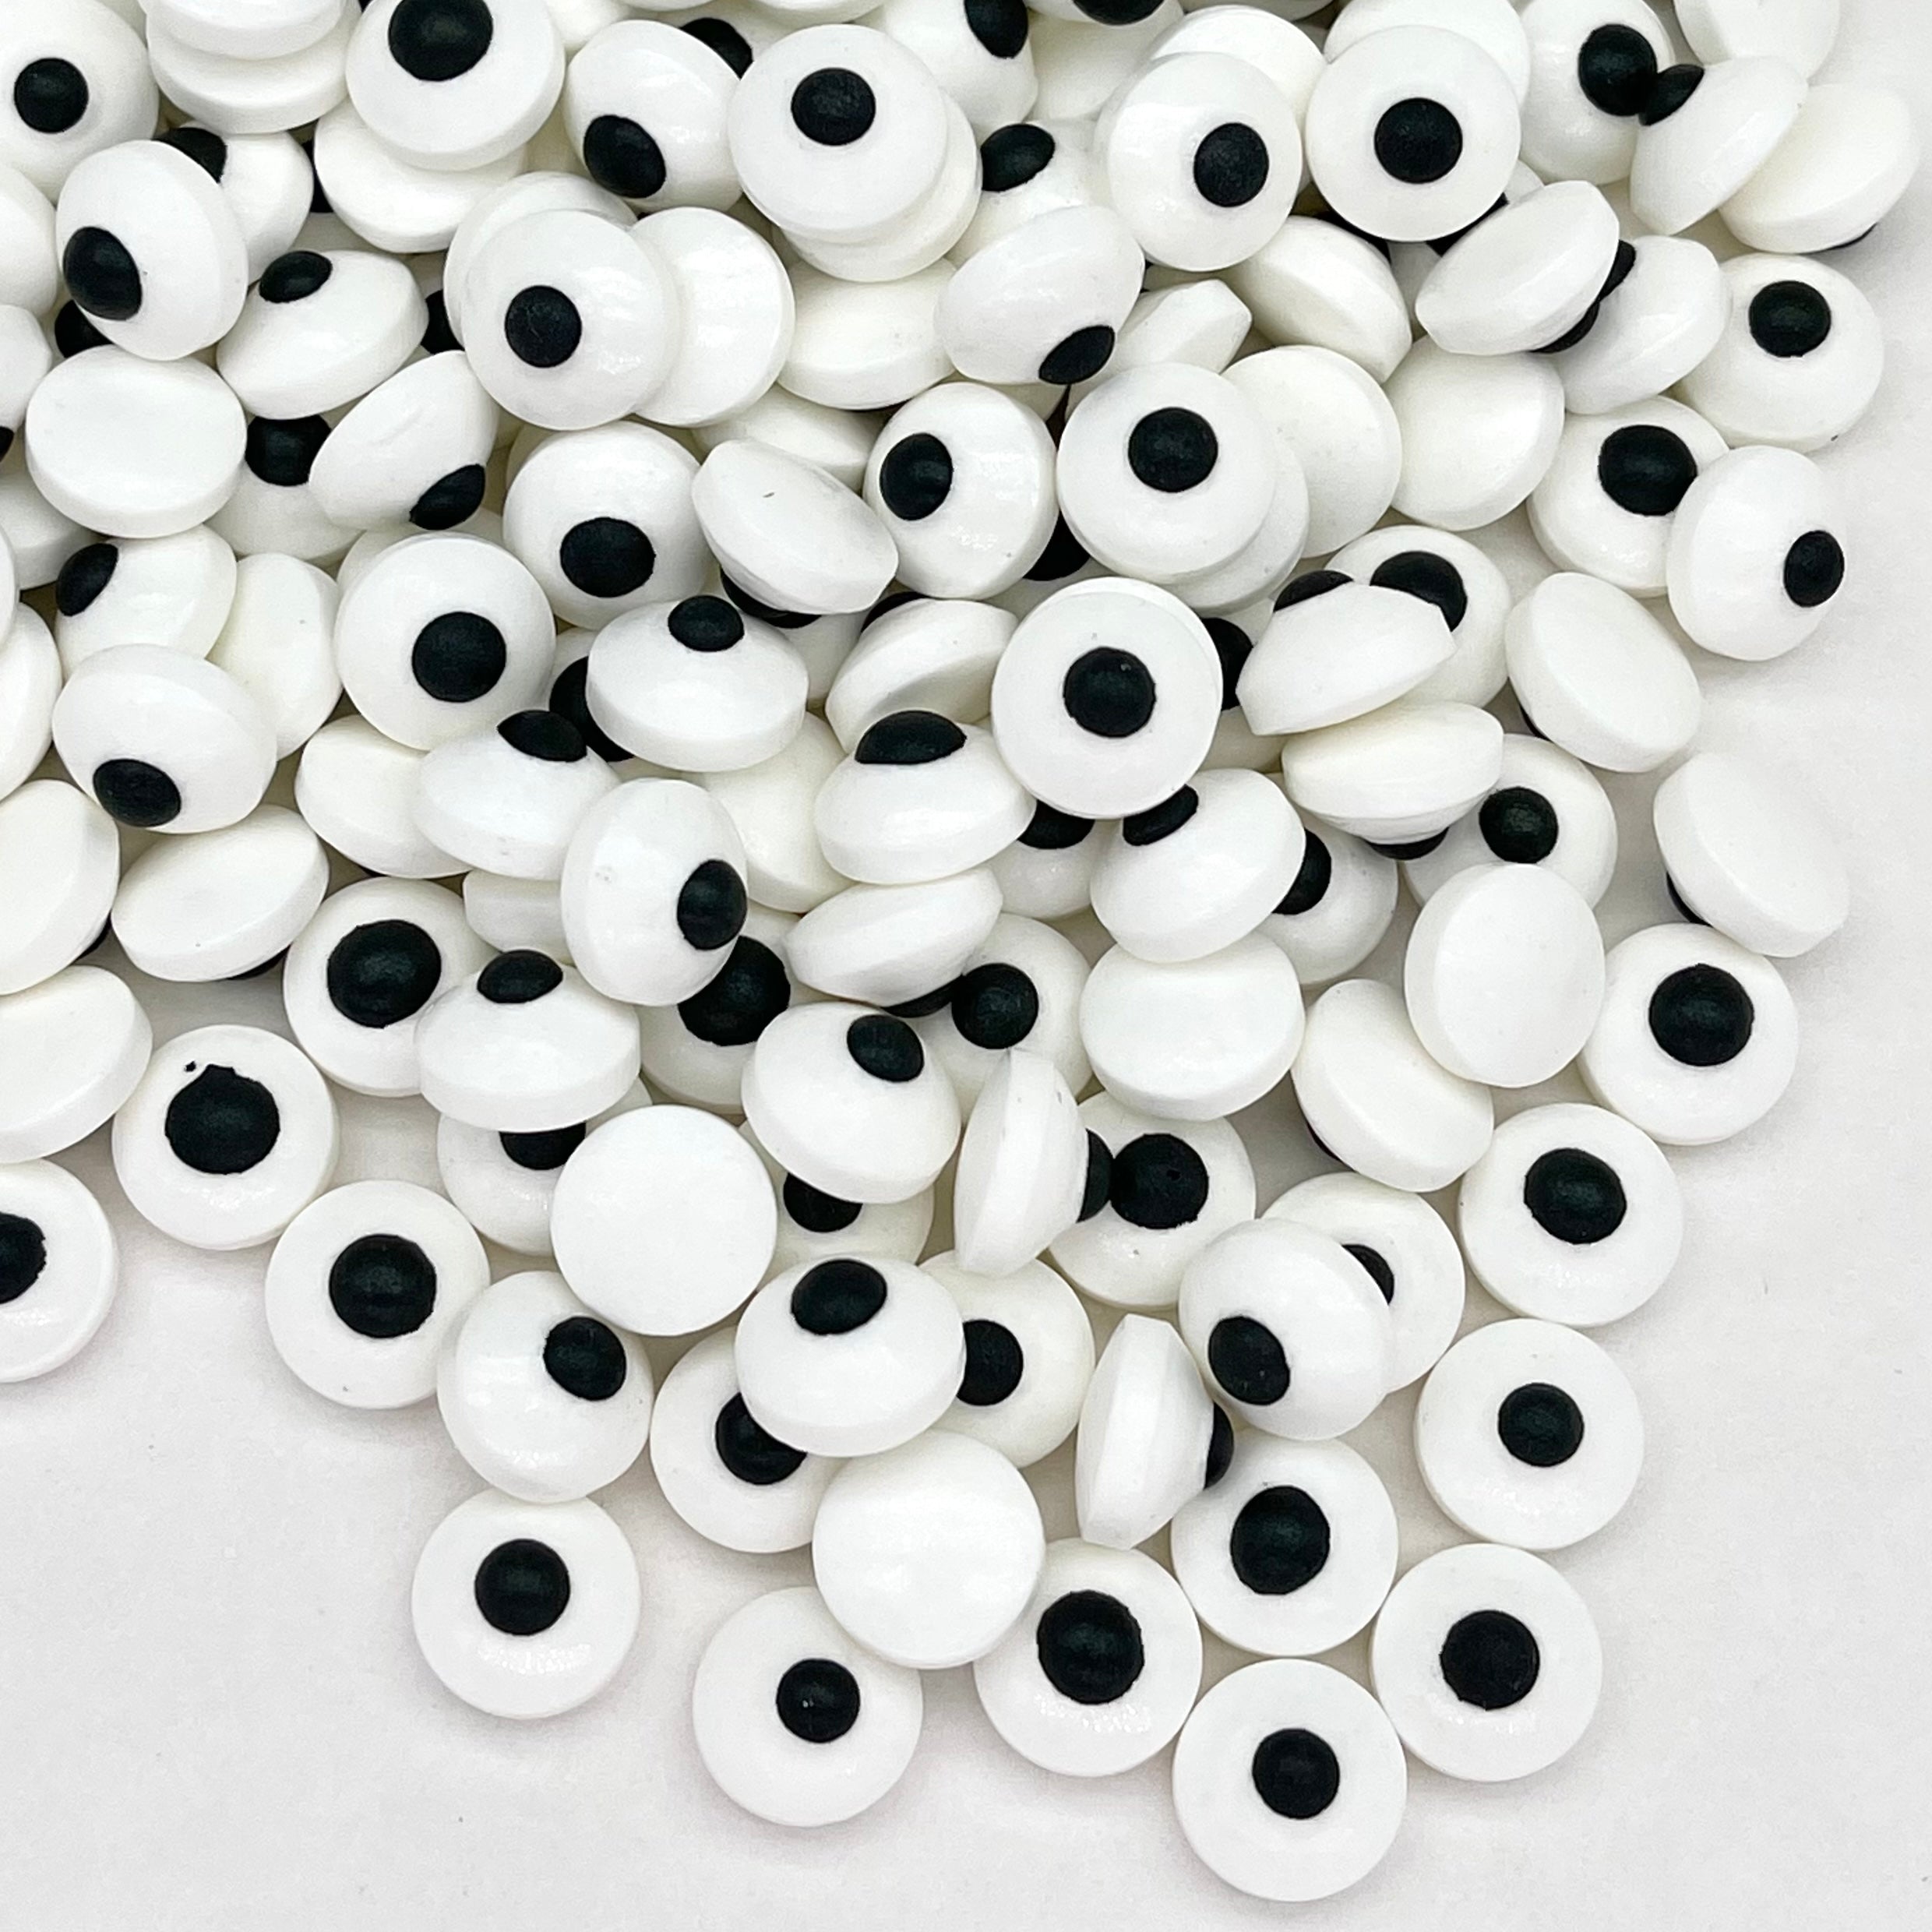 Eyeball shaped sprinkle candies for cakes, cookies, cupcakes, cake pops, cereal treats